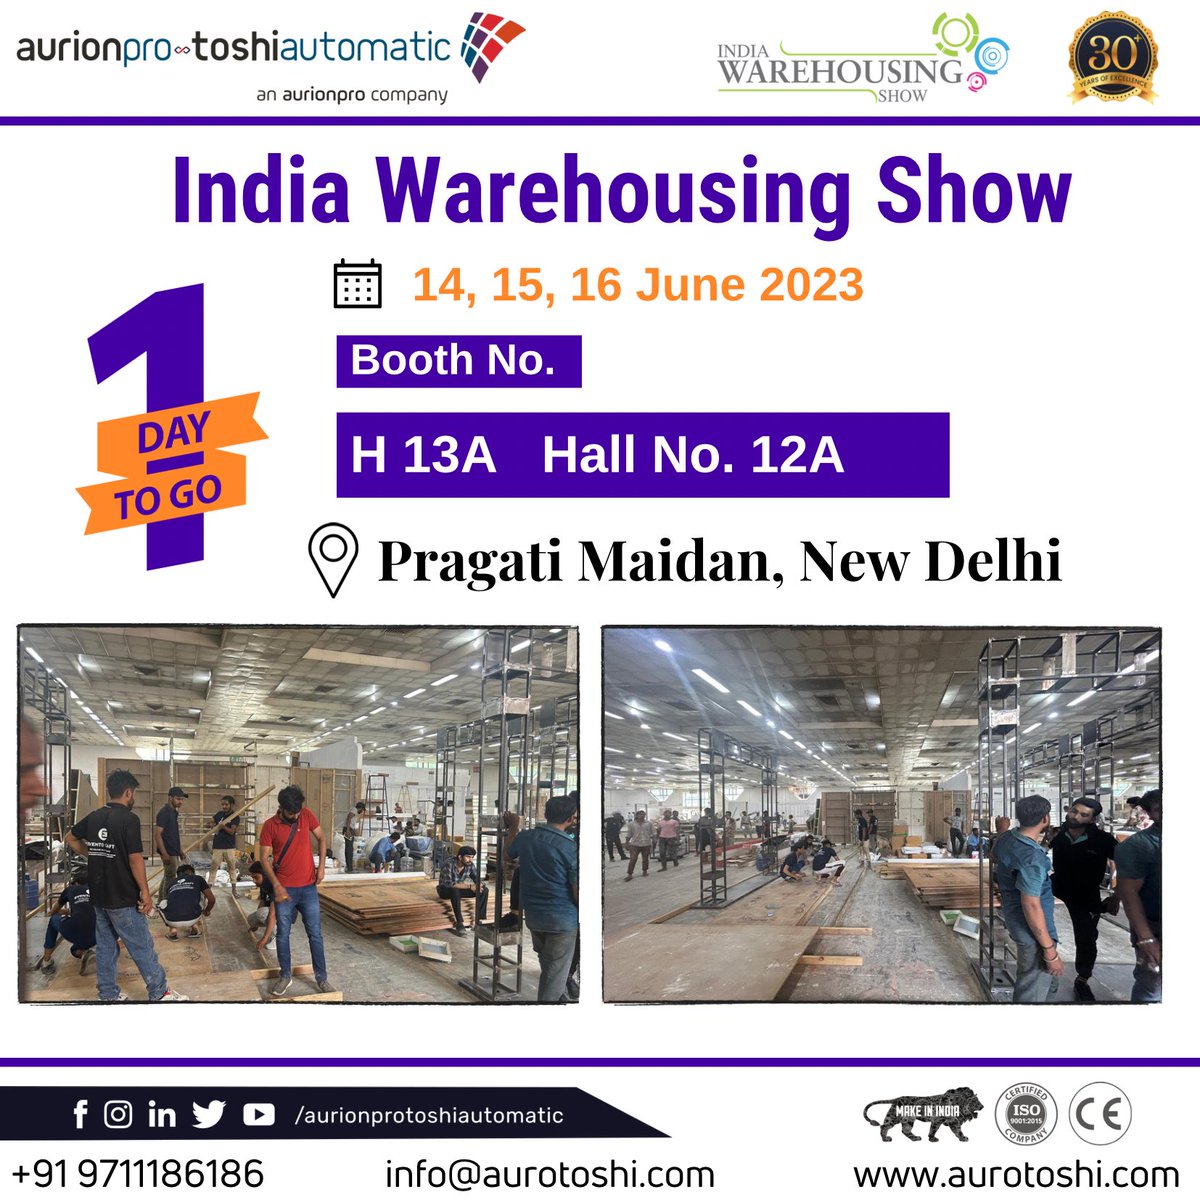 One Day To Go! Join Us Tomorrow at India Warehousing Show (14,15,16 June, 2023) . 1 Day to Go! 
Don't Miss Your Chance to Connect with Us at the Biggest Warehousing Event of the Year.  

#automation #event #iws #indiawarehousingshow #india #pragatimaidan #trending